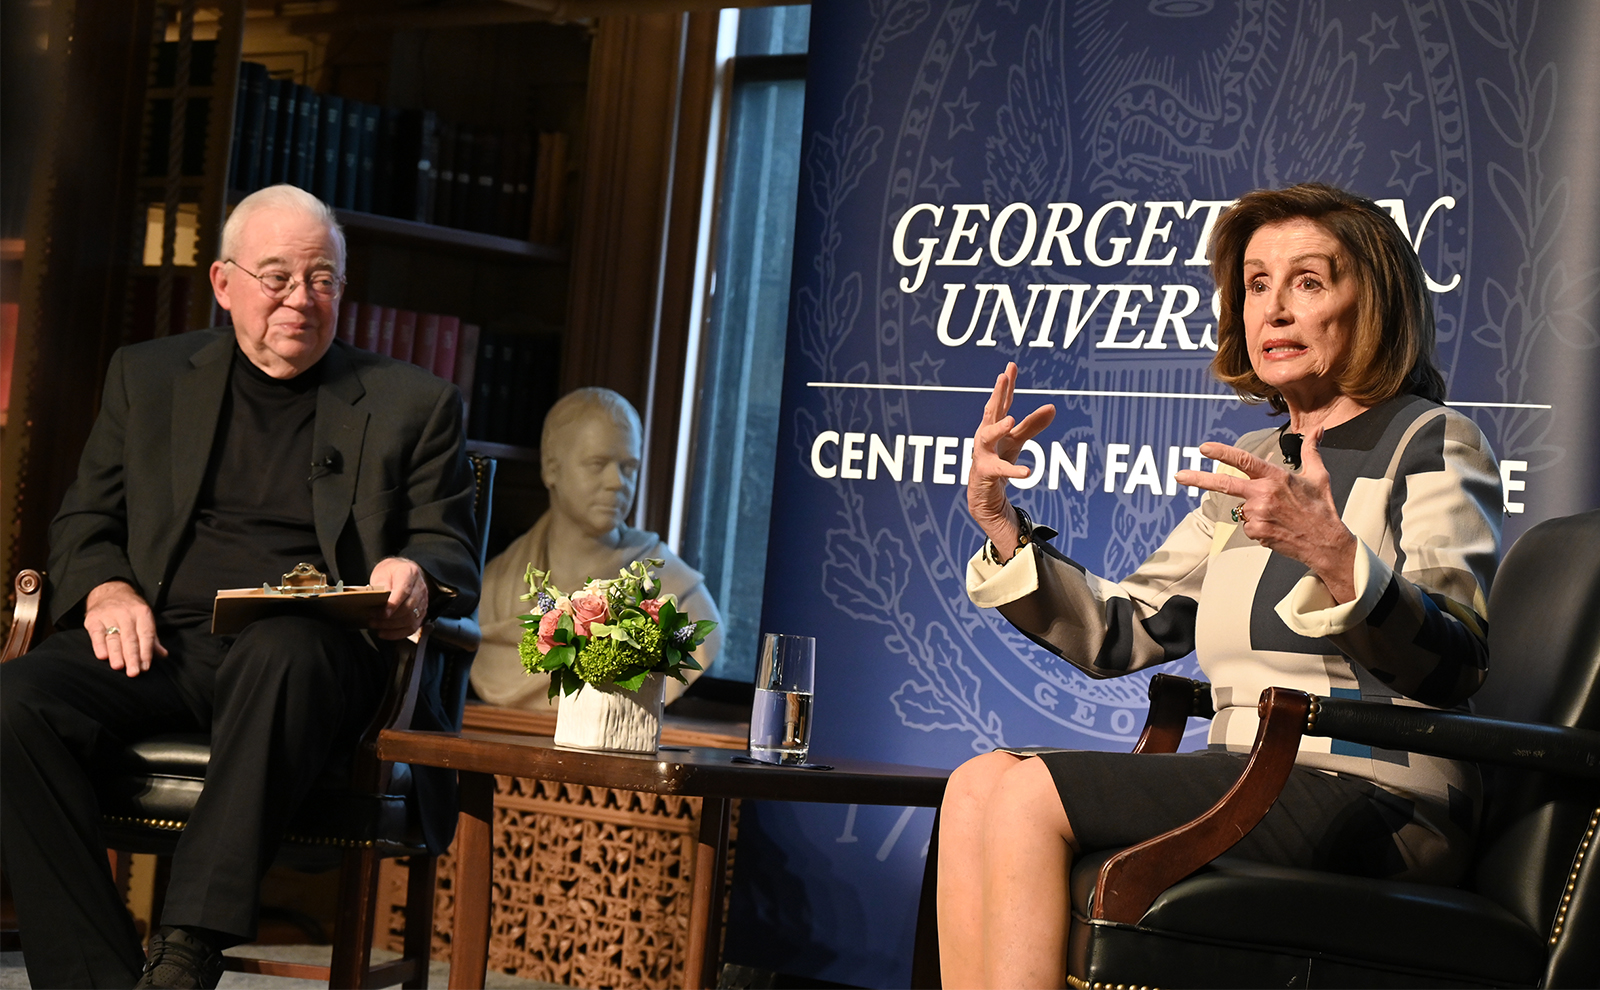 Former House Speaker Nancy Pelosi, right, speaks at Georgetown University’s Center on Faith and Justice with Jim Wallis, left, Thursday, March 23, 2023, in Washington. RNS photo by Jack Jenkins